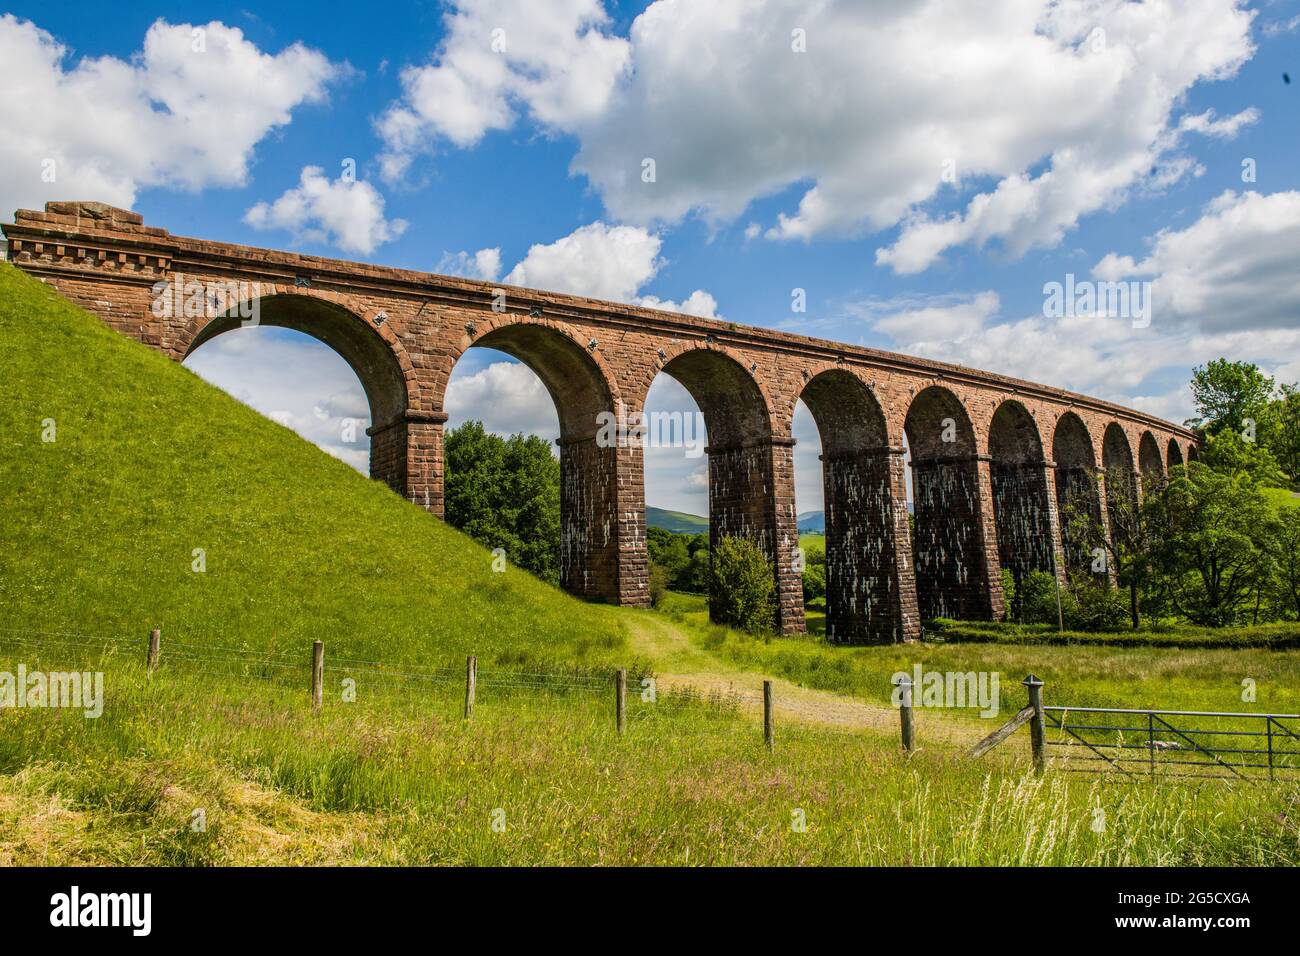 A sadly disused arched railway viaduct (Lowgill Viaduct) at Firbank near Sedbergh in Cumbria North West England Stock Photo